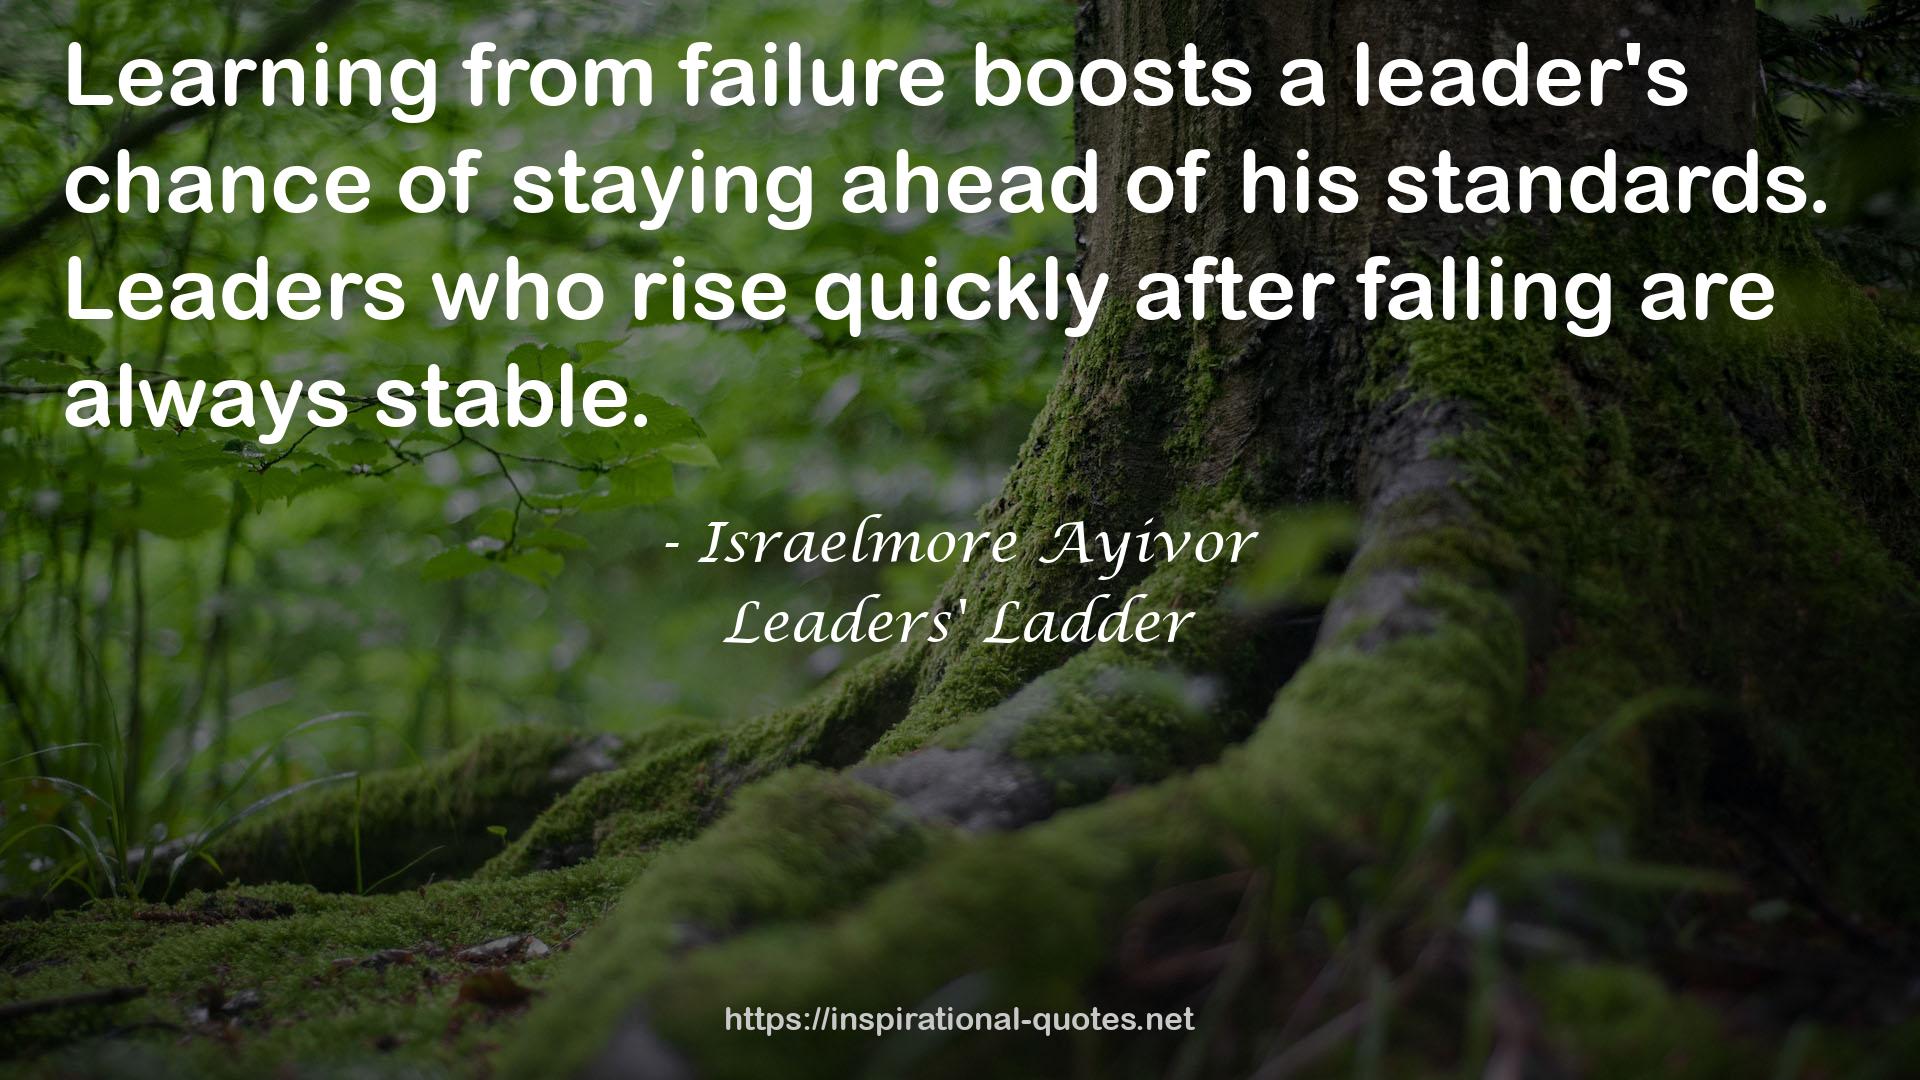 a leader's chance  QUOTES